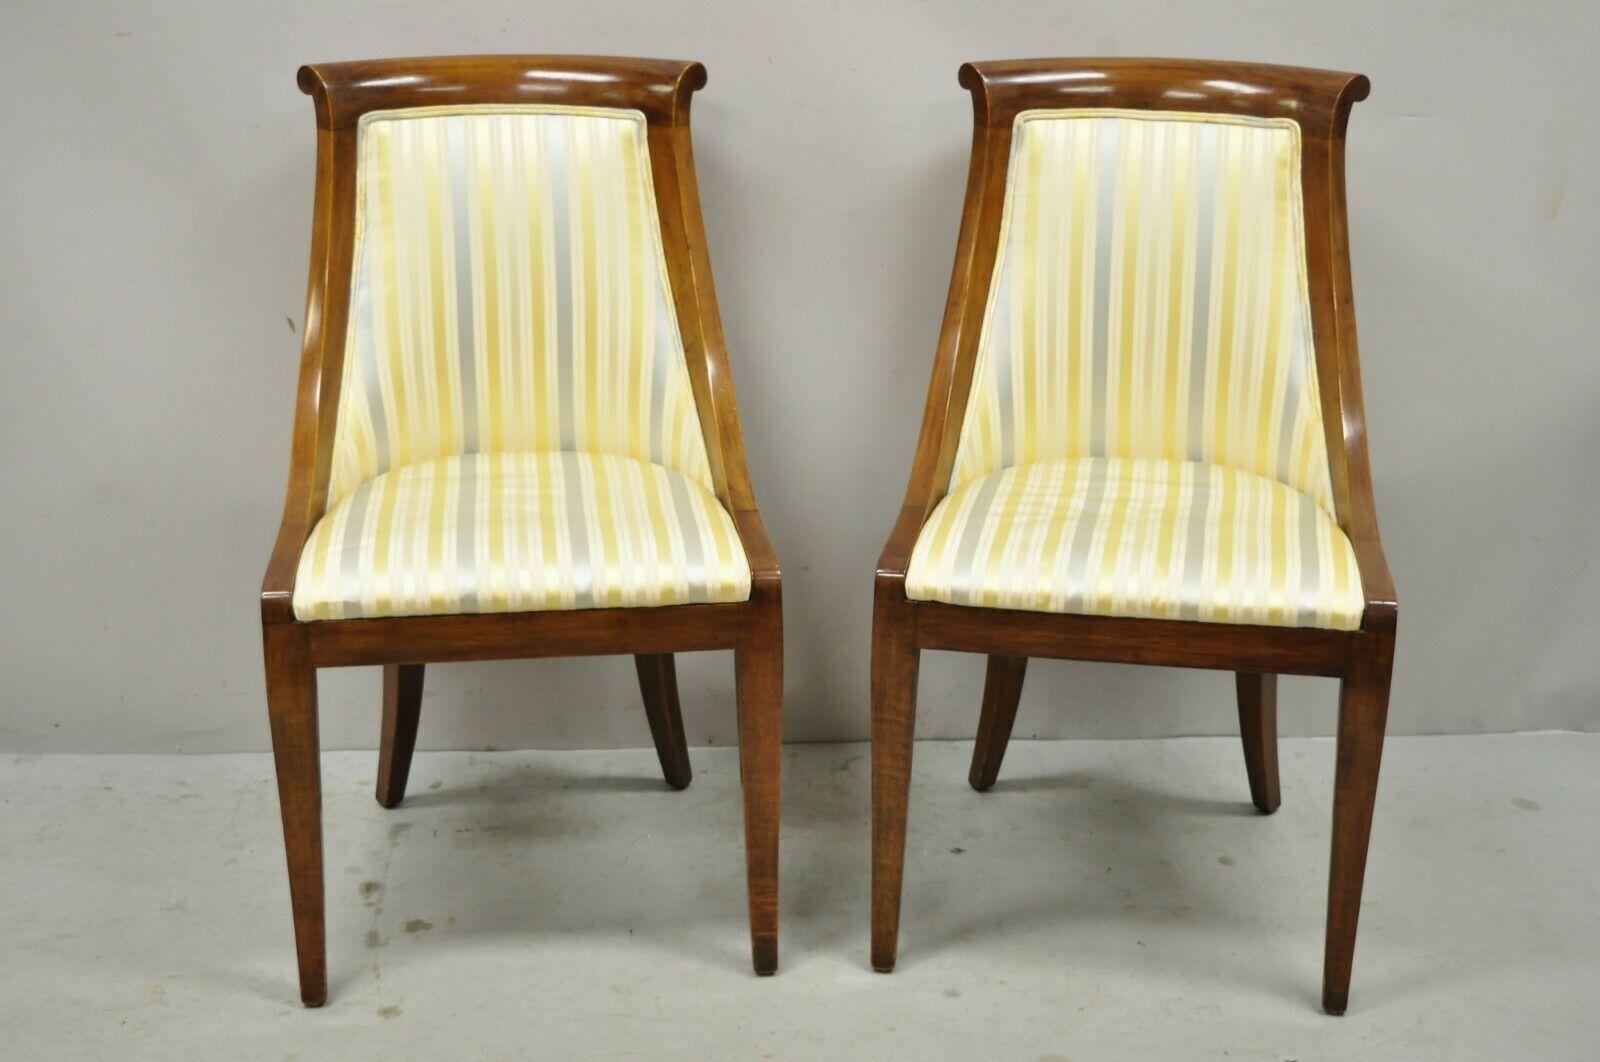 Vintage Italian Regency cherry wood saber leg dining side chairs - a pair. Chairs feature solid wood frames, beautiful wood grain, distressed finish, shapely saber legs, quality craftsmanship, great style and form. Circa Mid 20th Century.